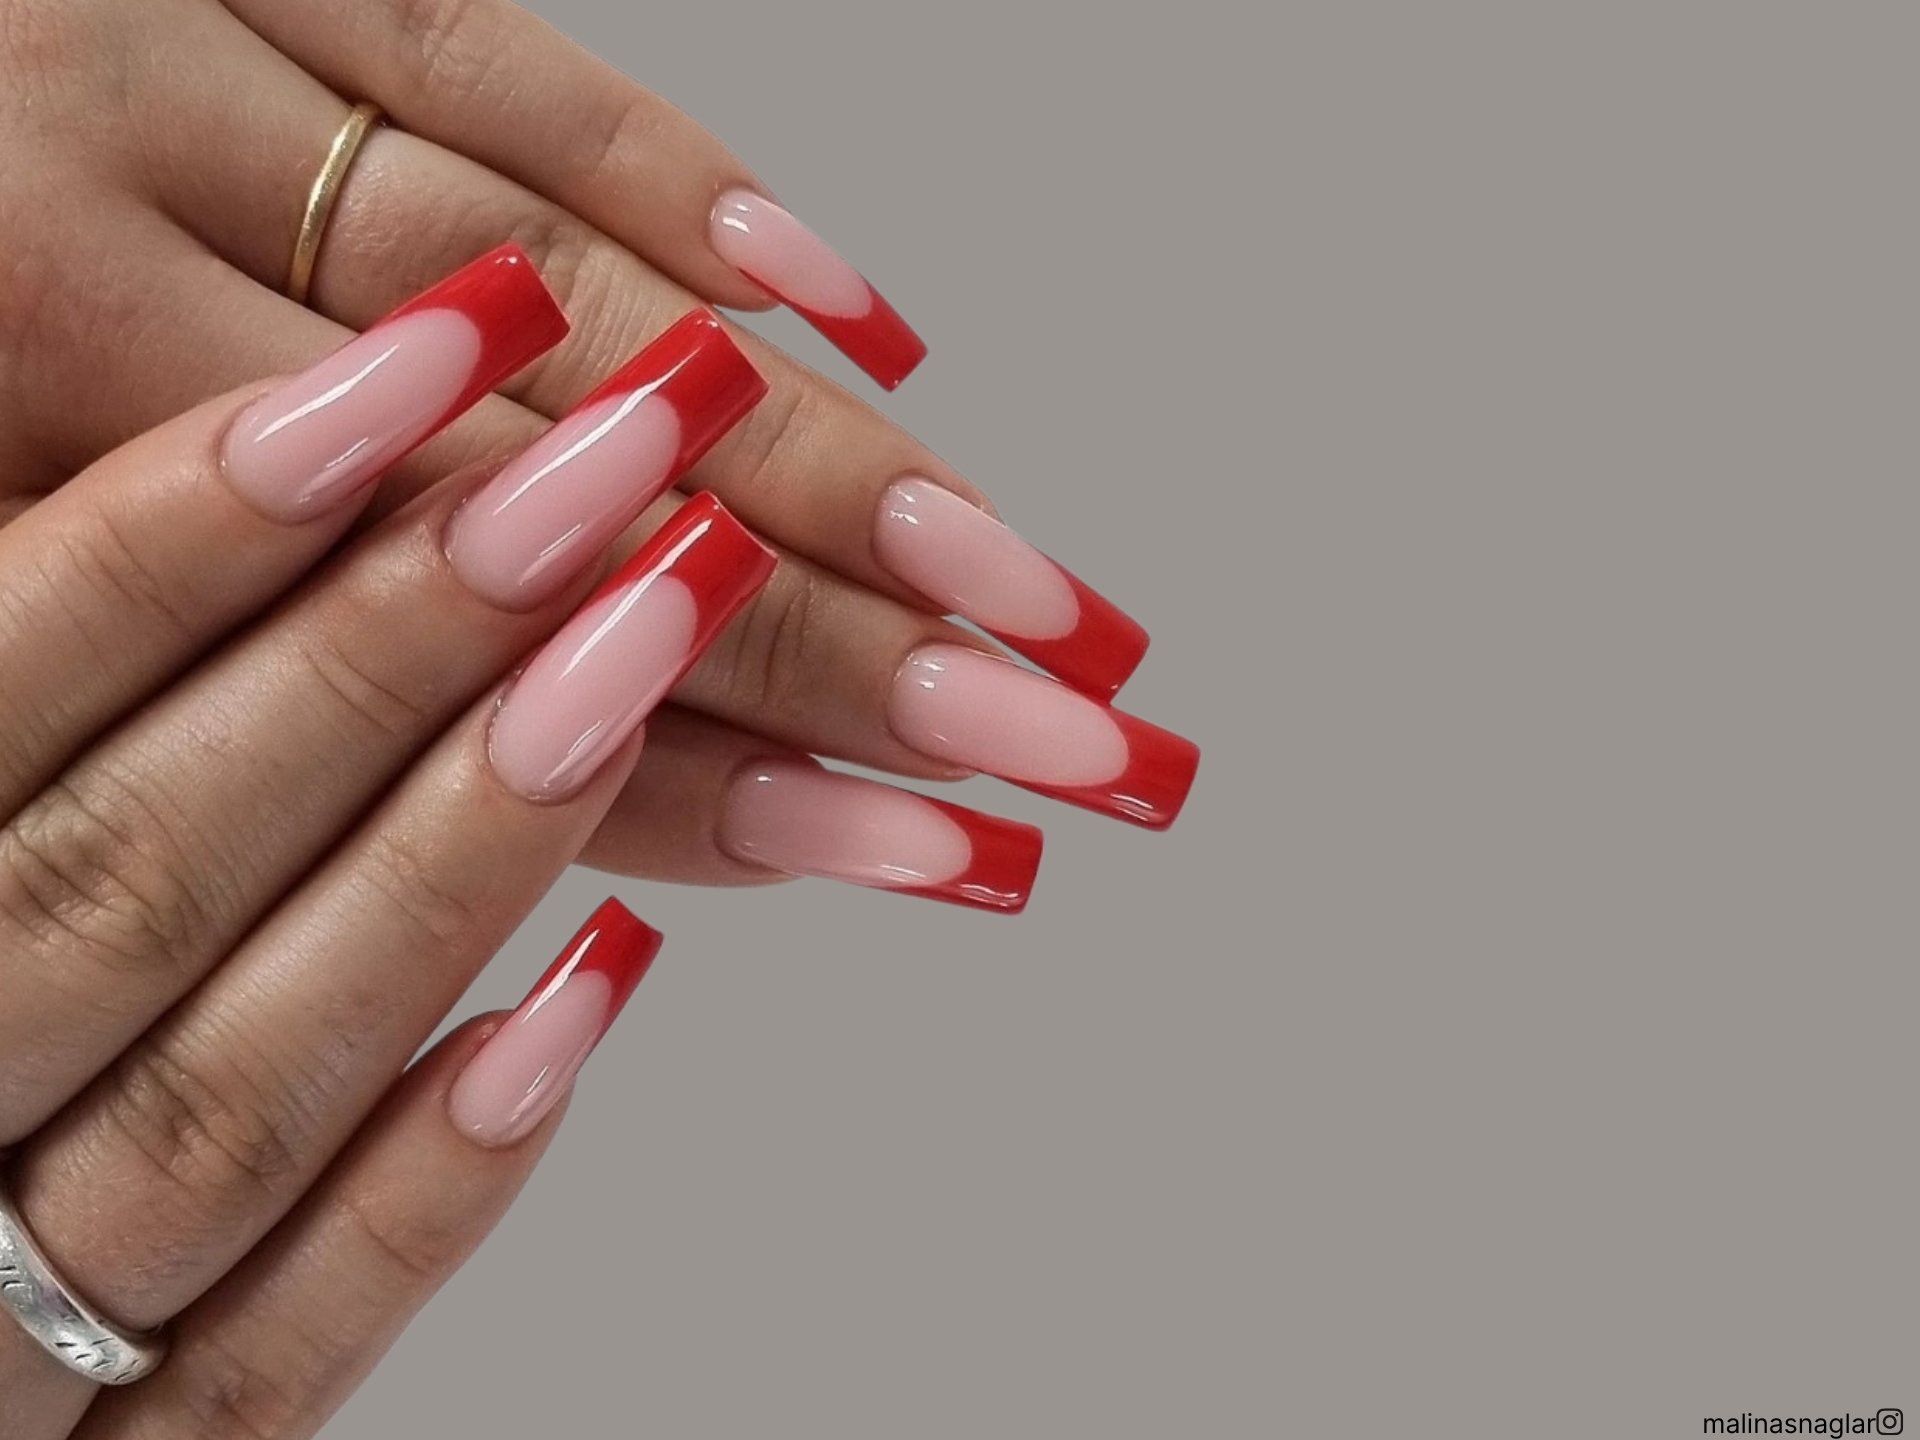 25 Square Nails To Screenshot For Your Next Manicure